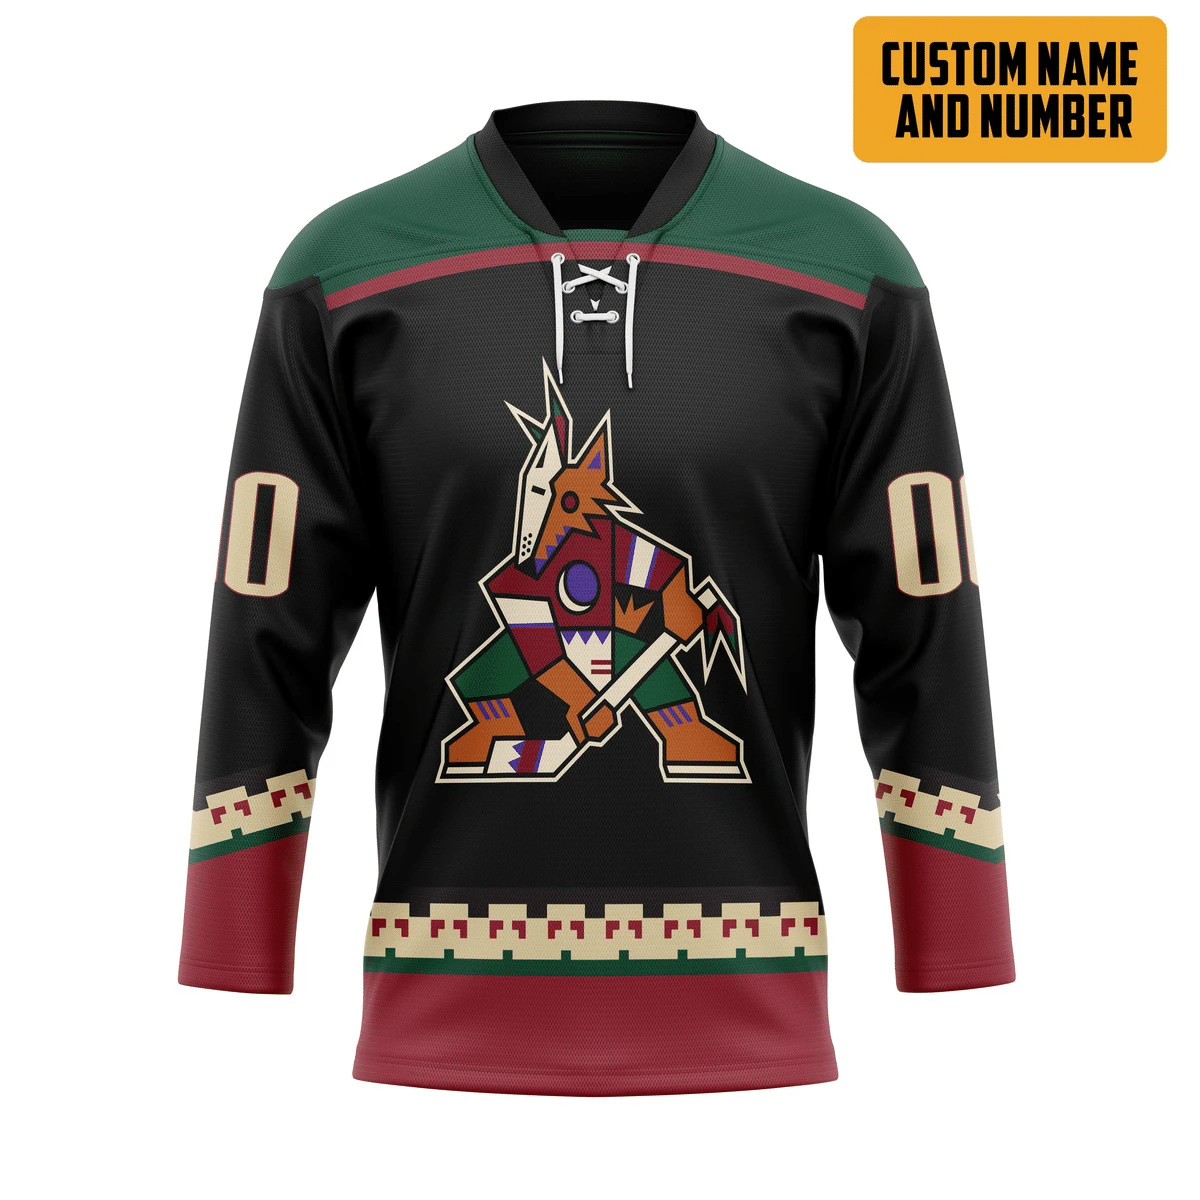 Check out our collection of unique and stylish hockey jerseys from all over the world 73